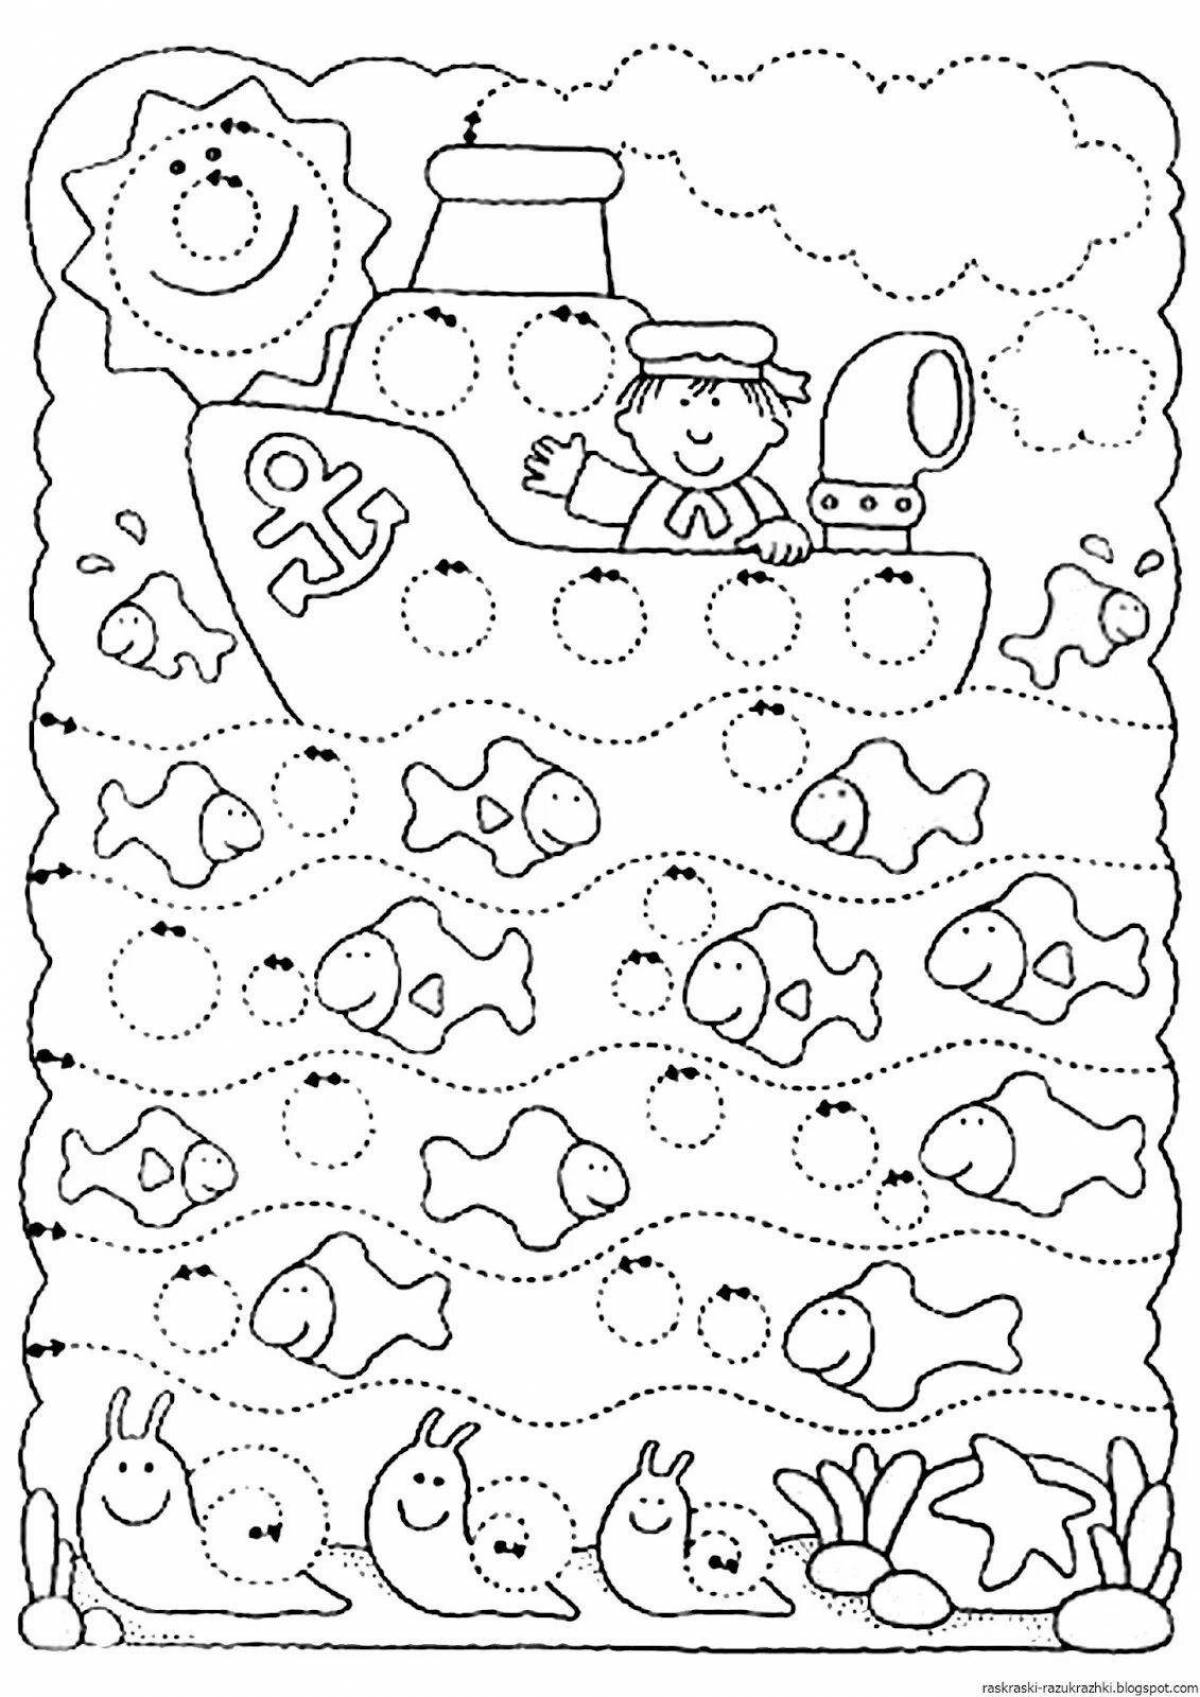 Colored explosive coloring book for developing fine motor skills